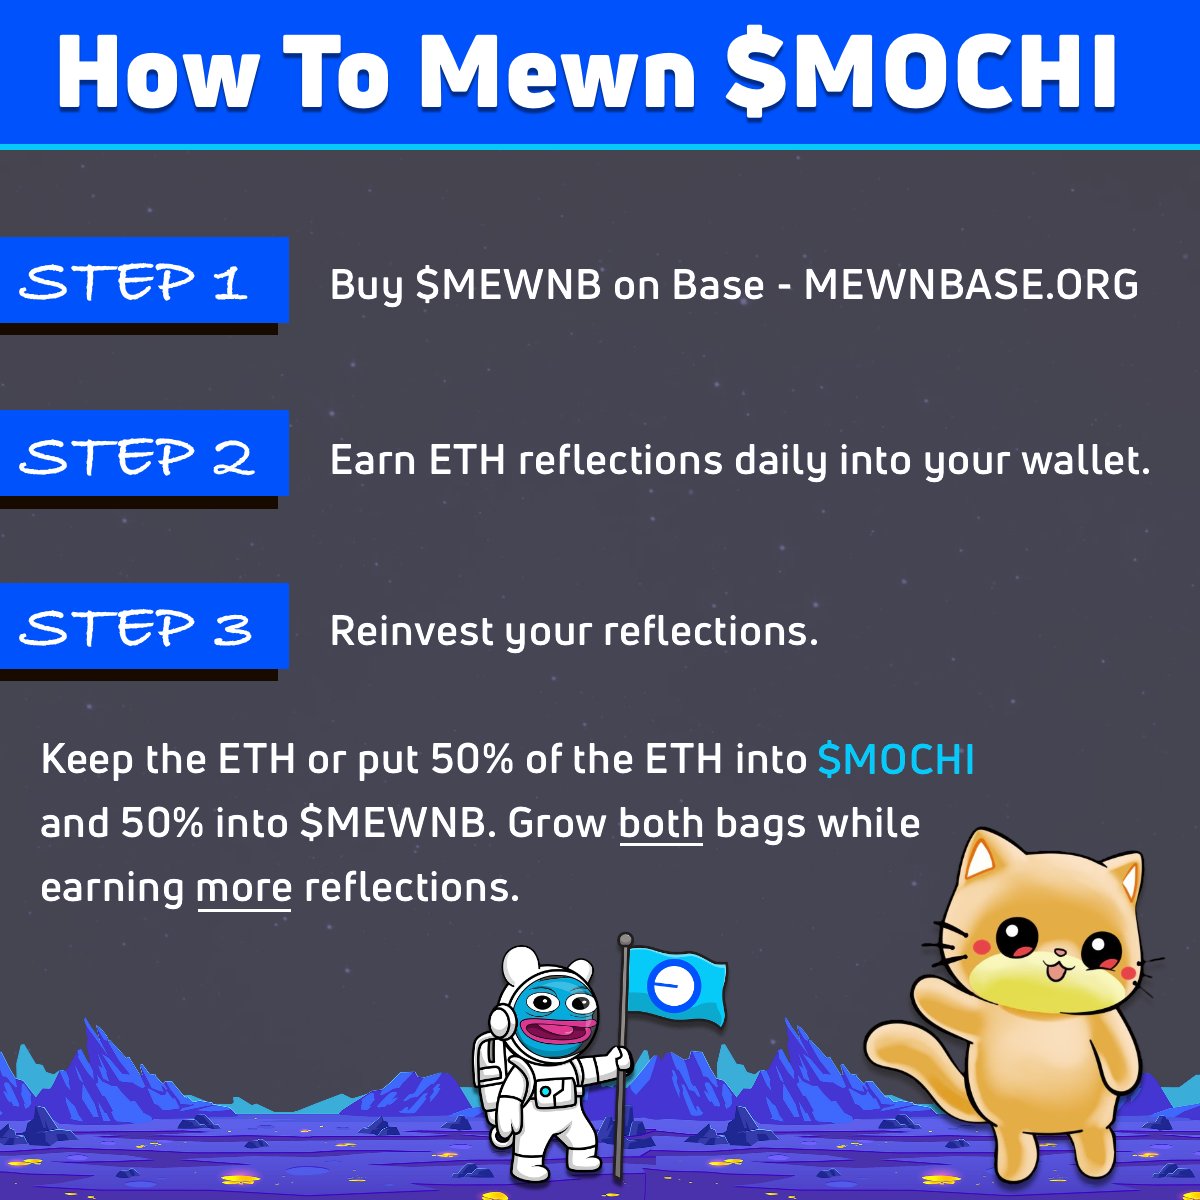 Hey @mochi_token holders and lovers of @base. We are doing our part to help onboard one billion people onchain and we support all Base projects. We’re MewnBase. Our contract is renounced, liquidity is burned, and we’re audited. We provide daily ETH “Reflections” for simply